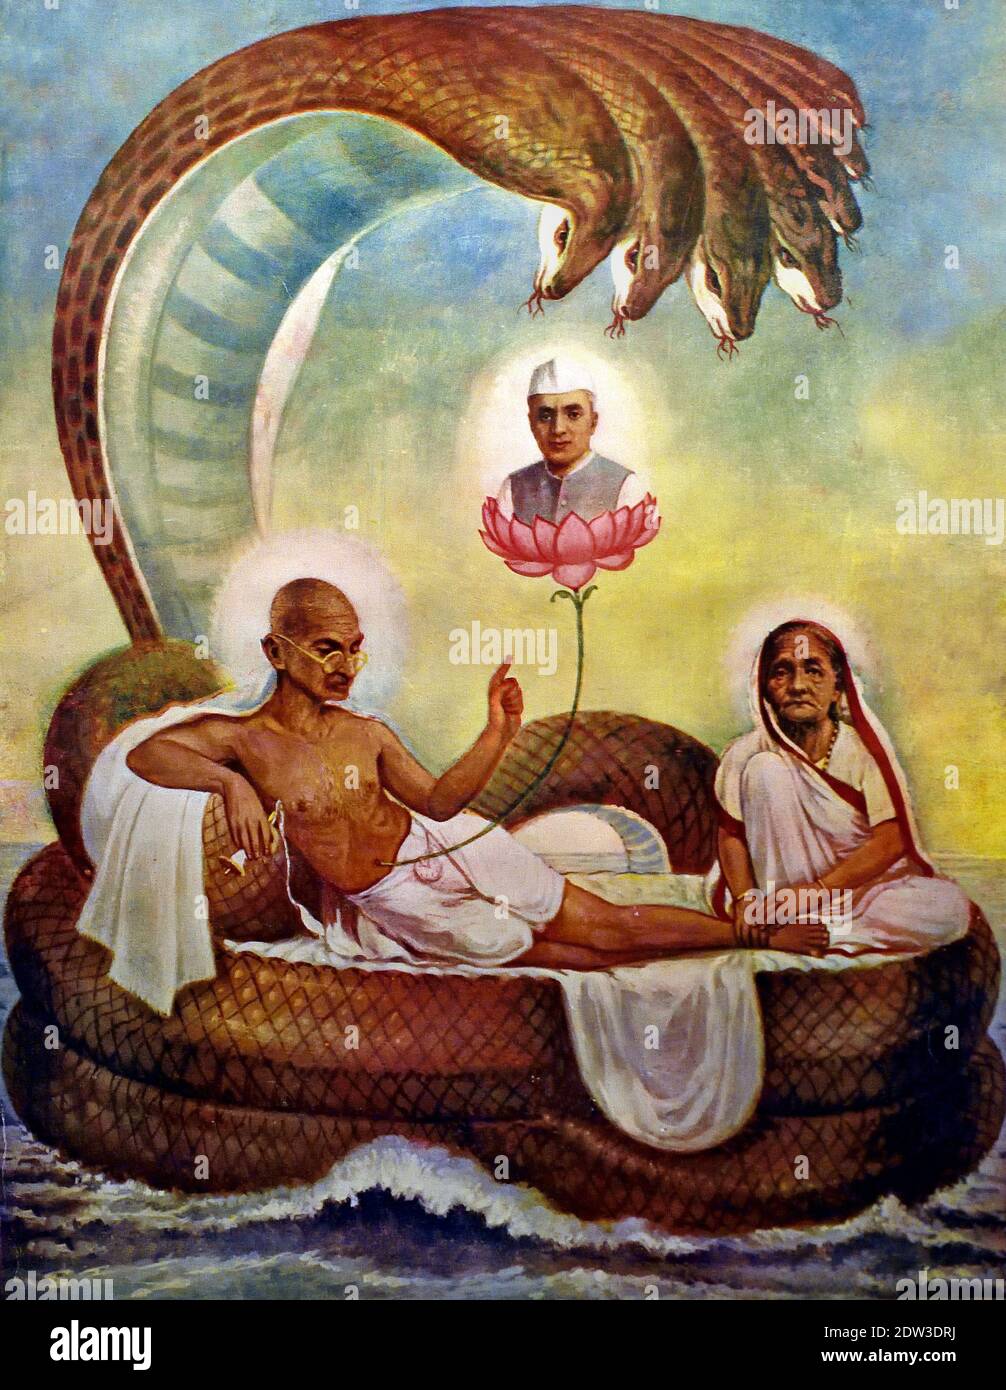 Gandhi as Vishnu on the snake Ananta In representations of Vishnu a lotus grows from his navel on wich Brahma sits, symbolising creation. India, Indian, ( Mahatma Gandhi (1869-1948, Mohandas Karamchand Gandhi) freedom fighter and proponent of nonviolent campaigning. country. ) Stock Photo